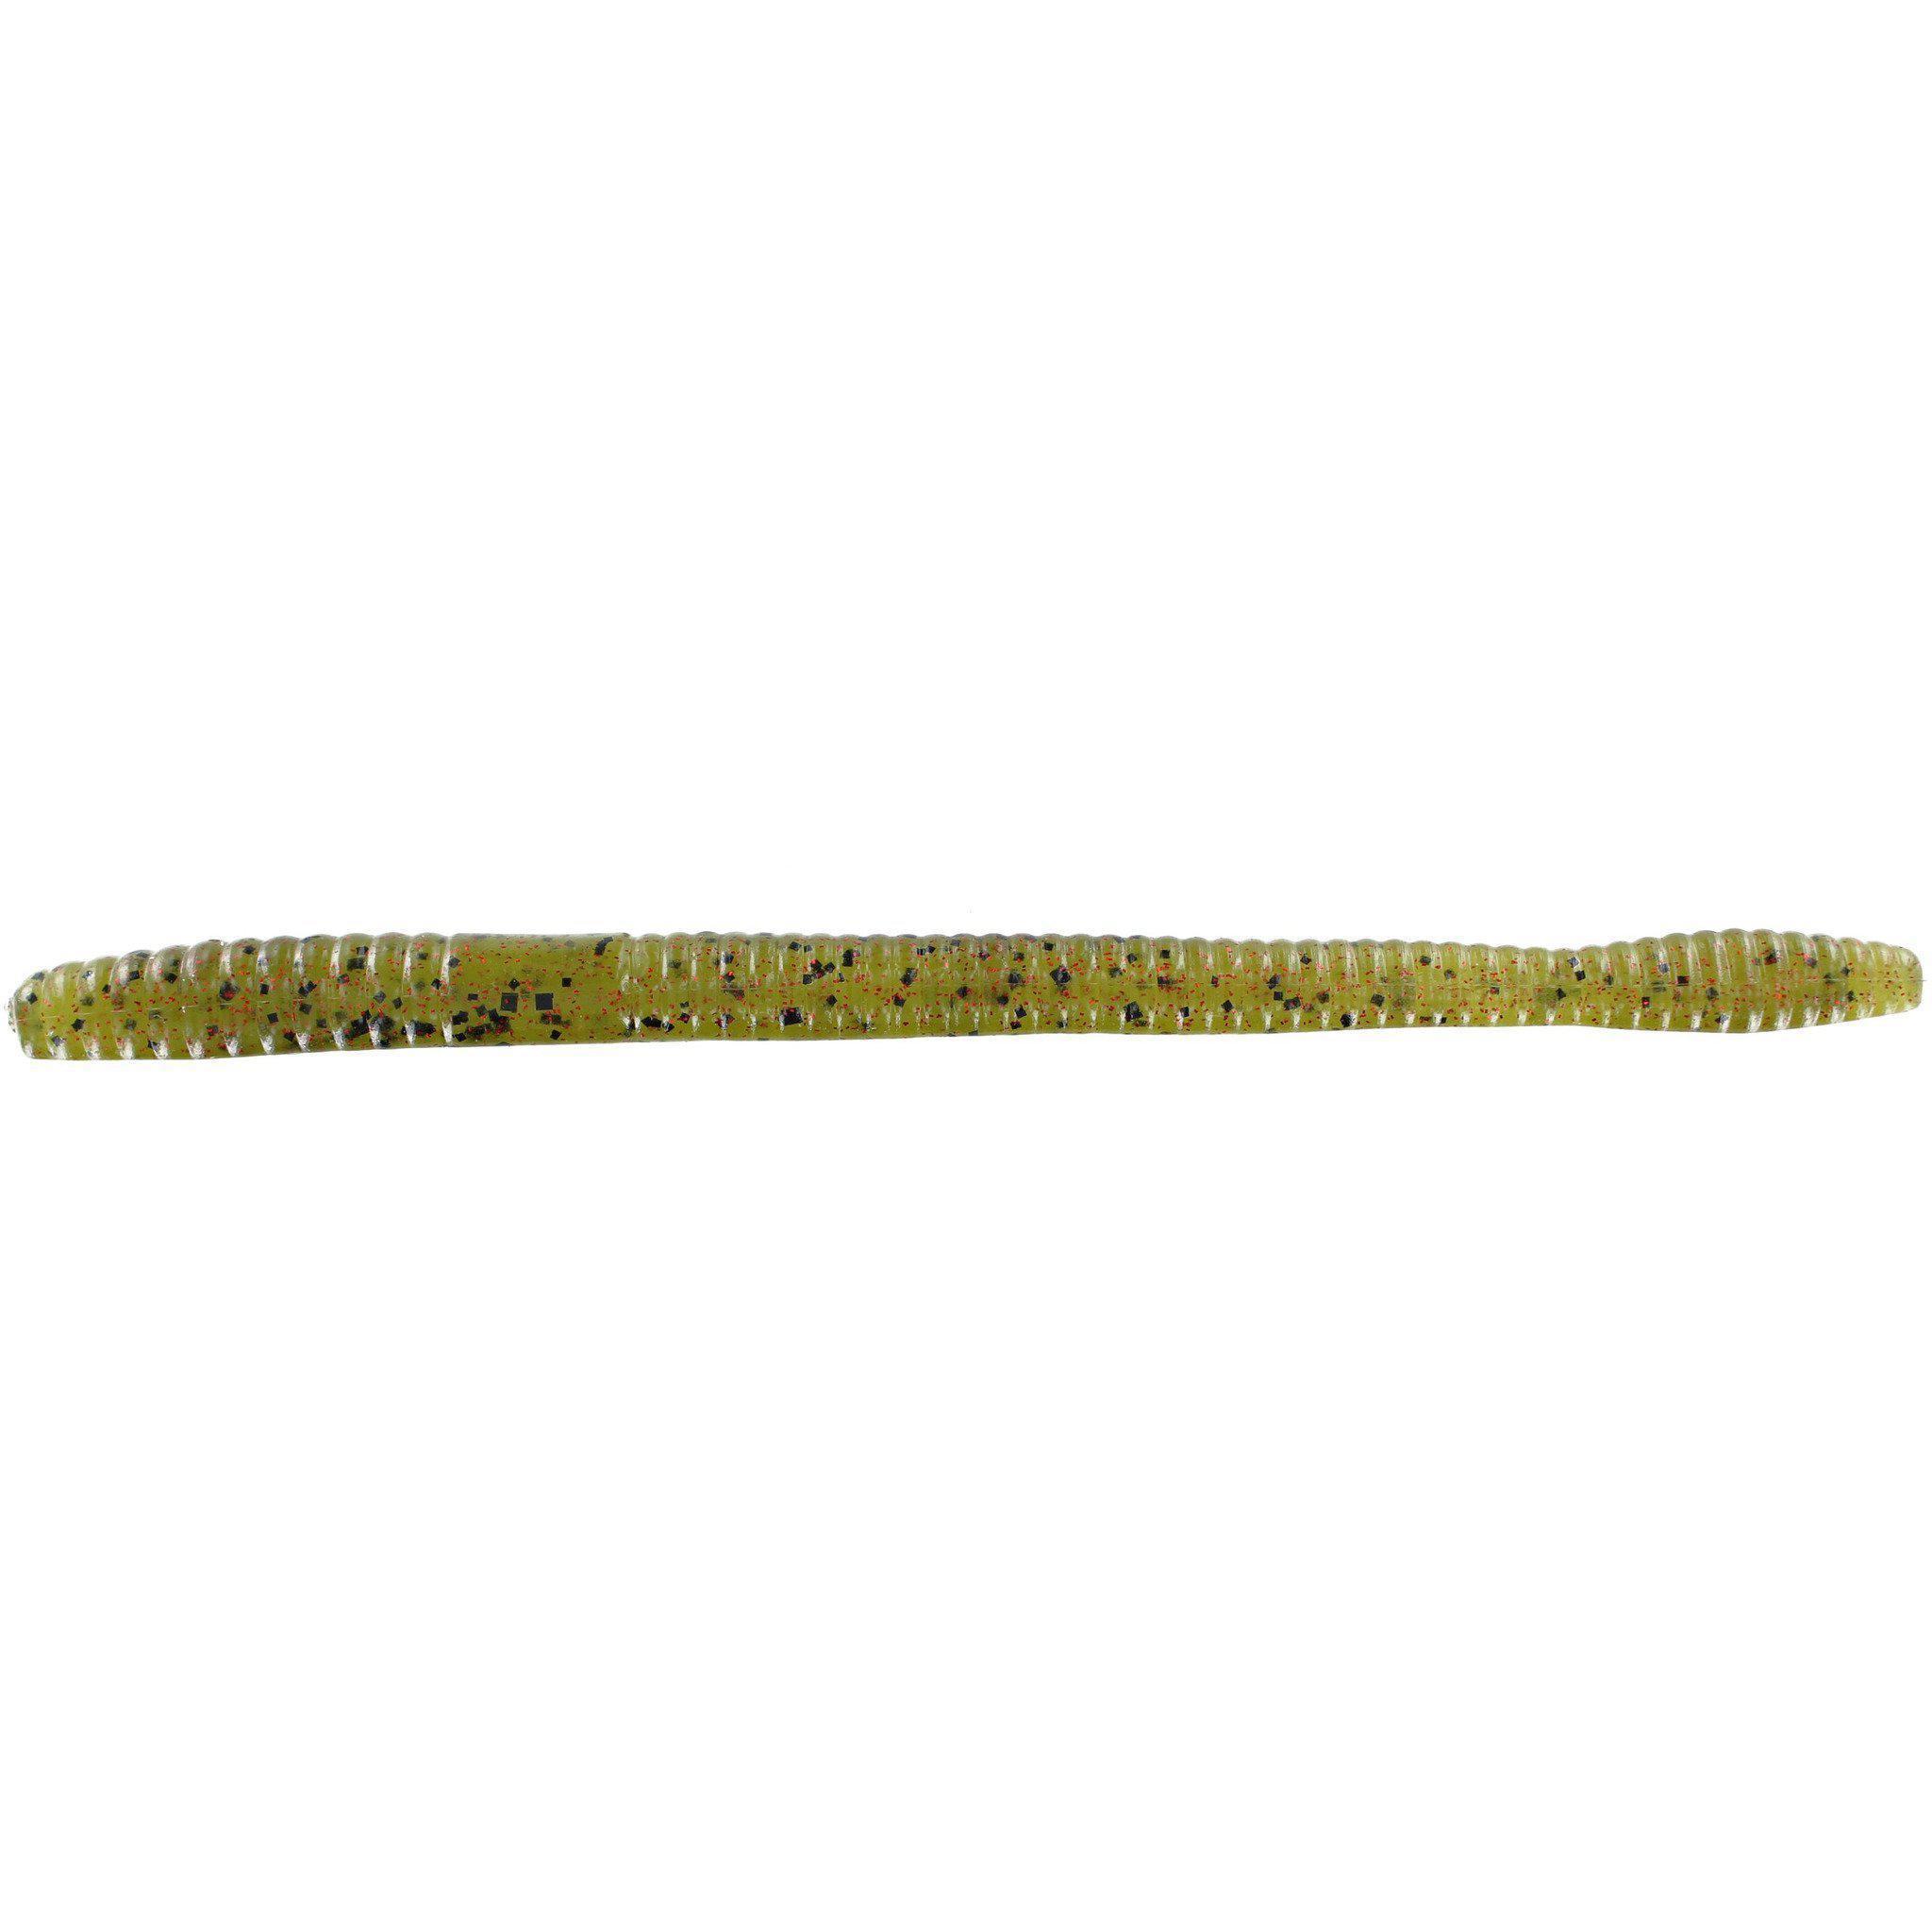 Zoom Bait Magnum Trick Worm-Pack of 8 (Watermelon Red, 7-Inch), One Size  (115-054)